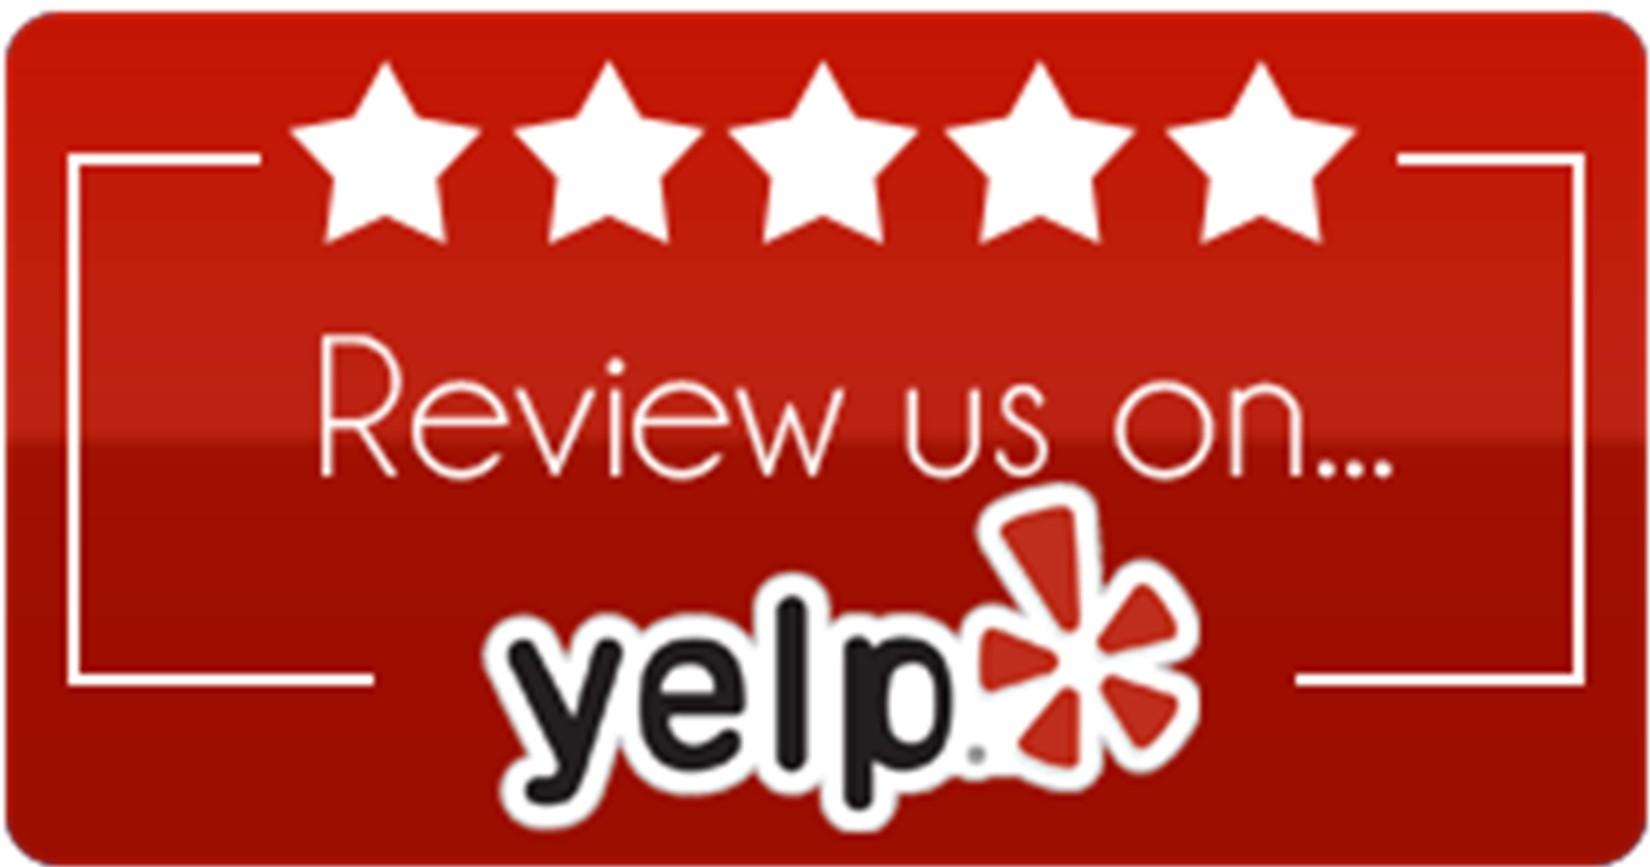 Yelp Review Logo - Review Us On Yelp